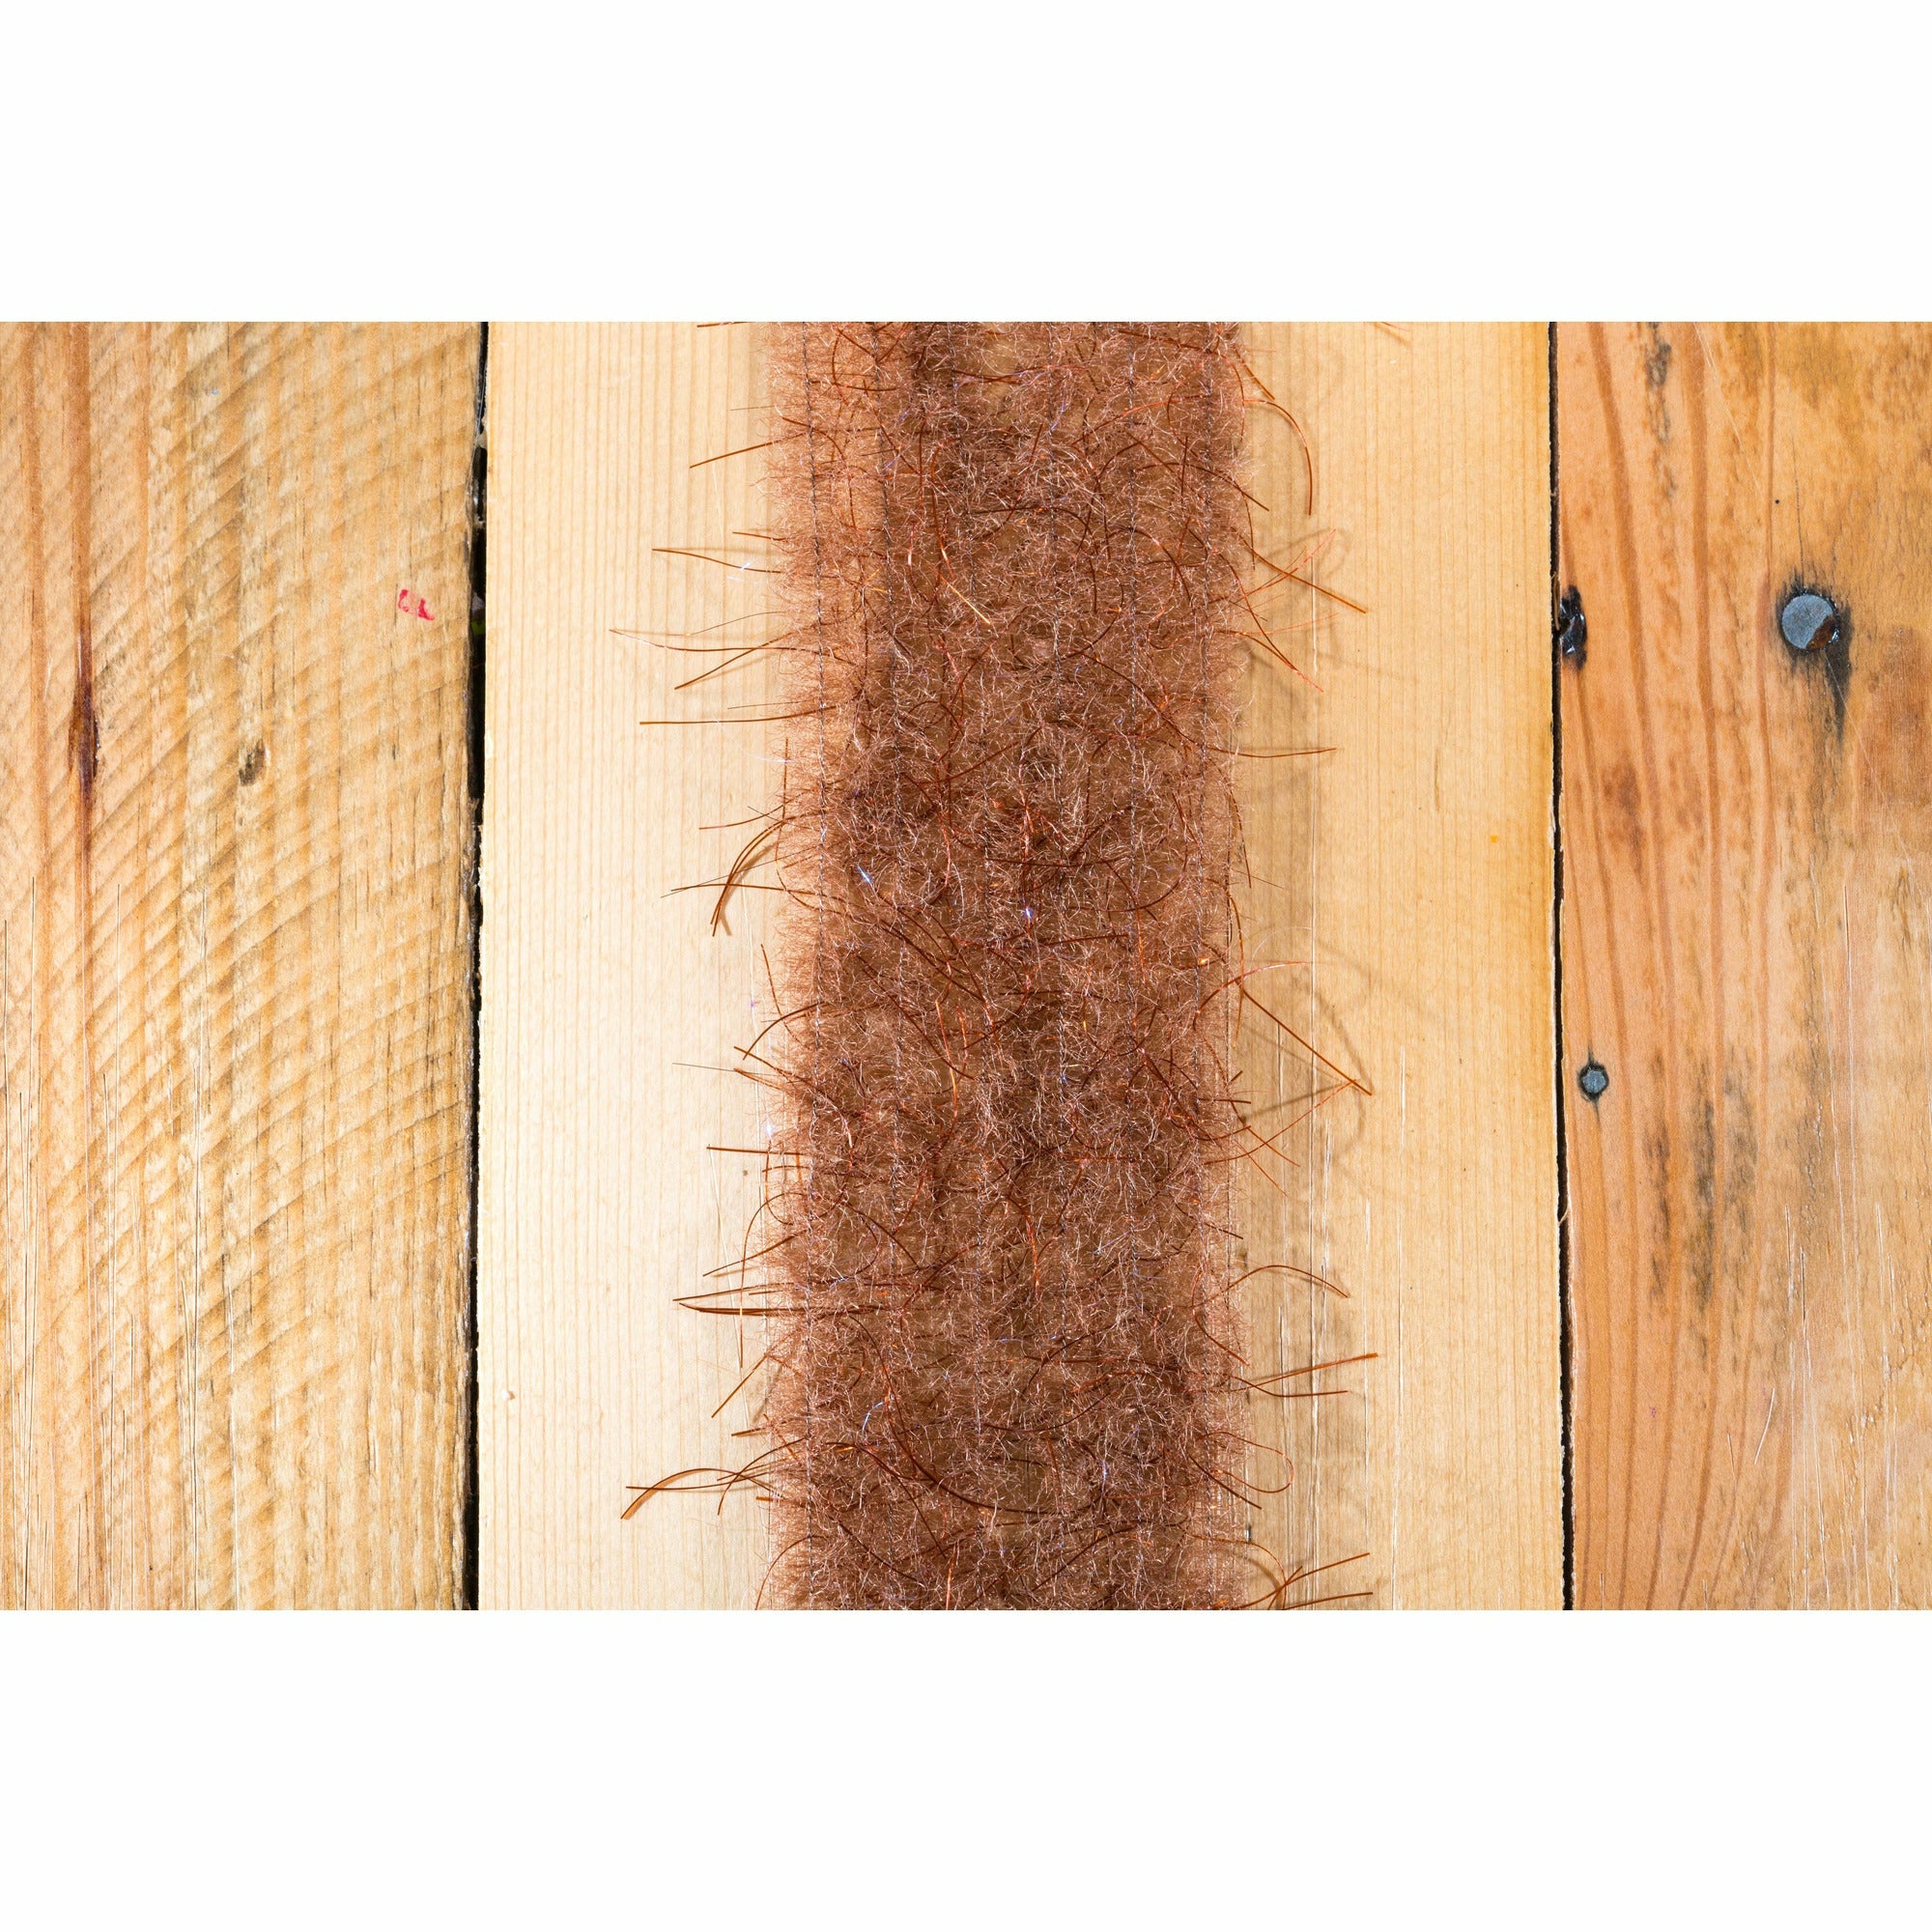 EP Wooly Critter Brush .5" - Brown